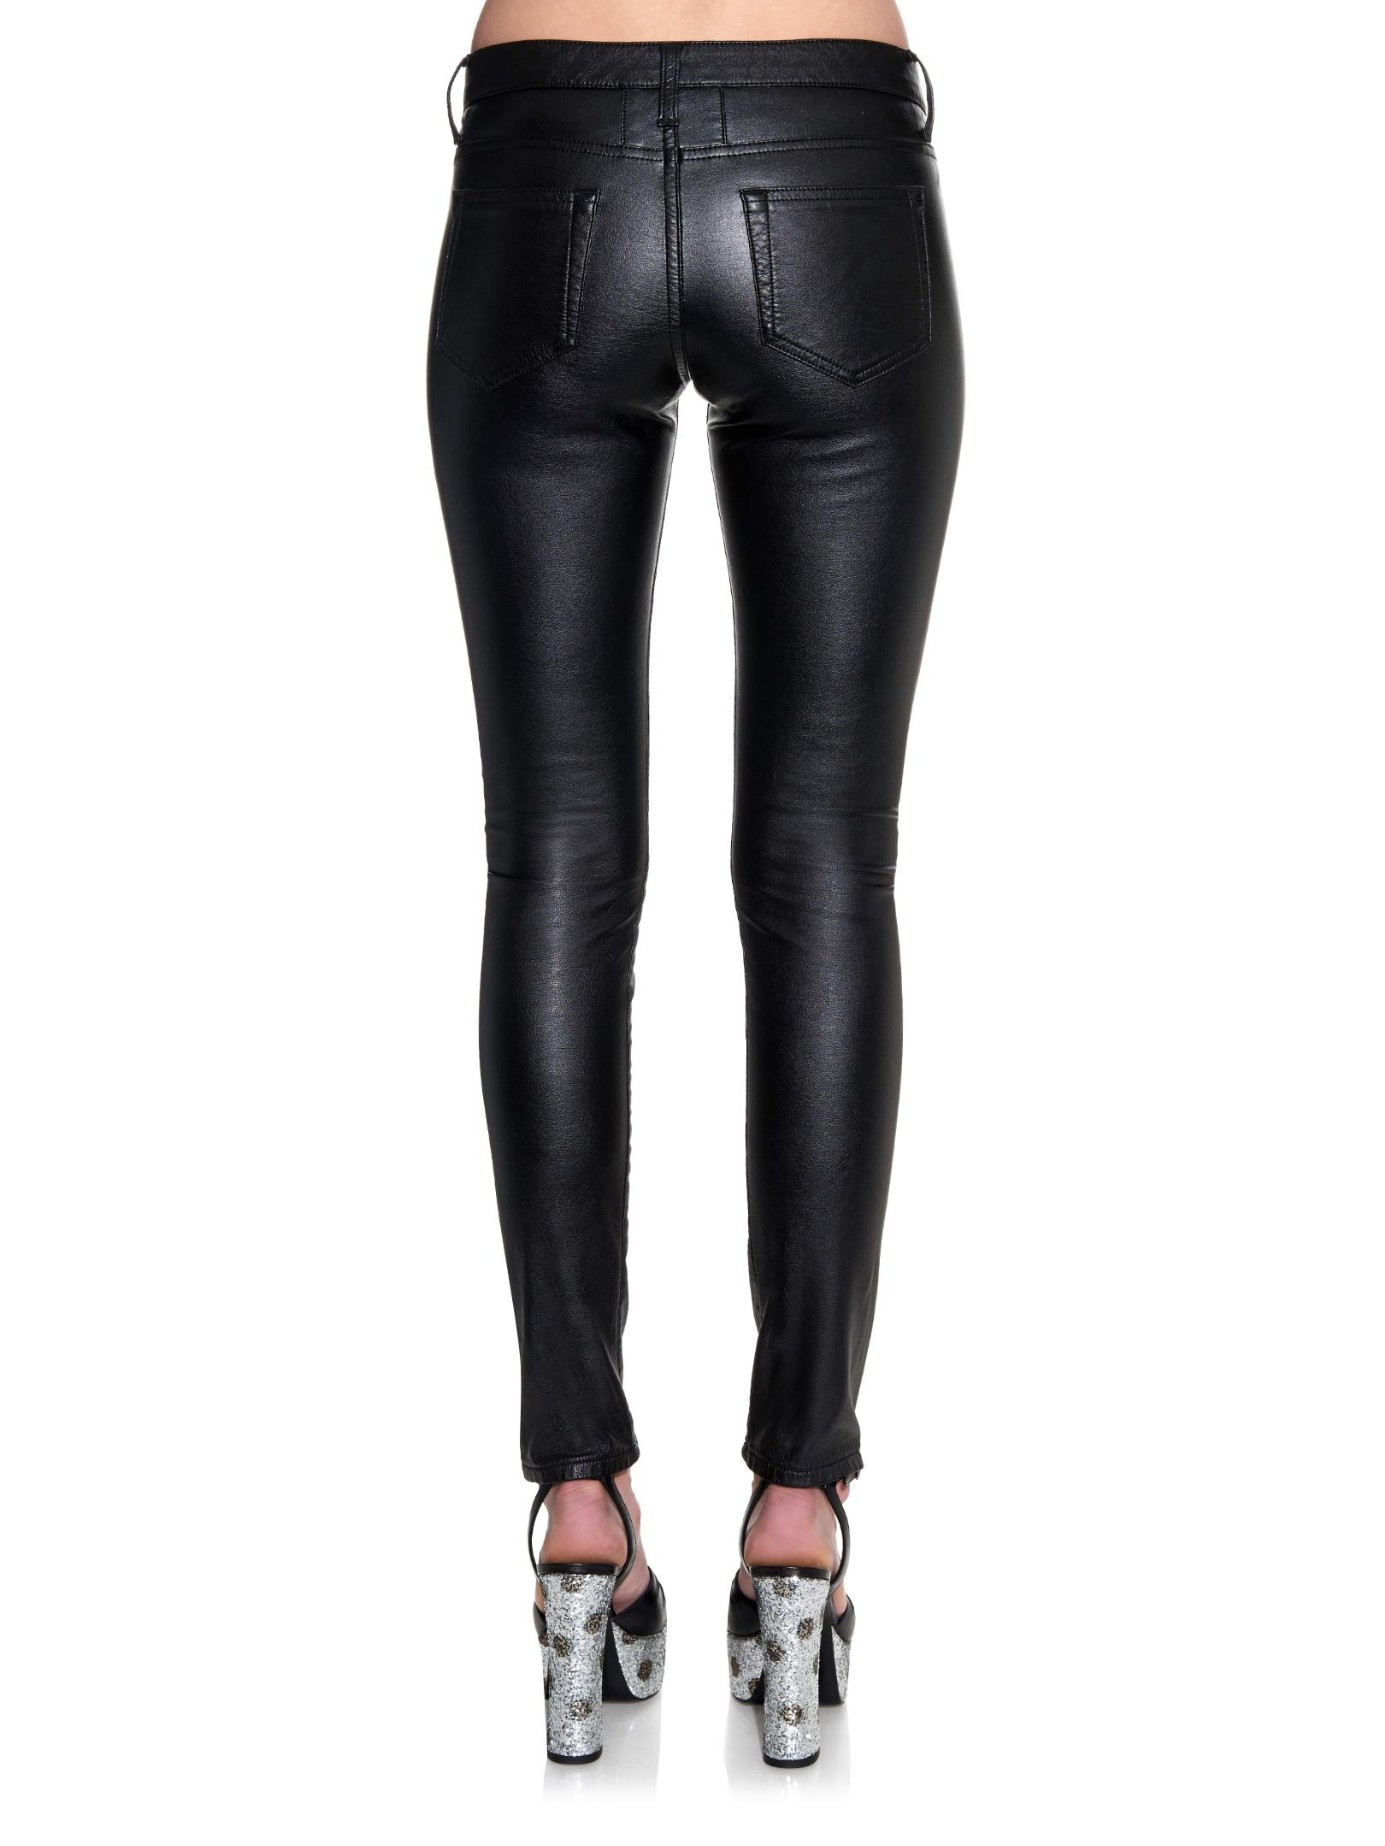 Saint Laurent Low-Rise Skinny Faux-Leather Trousers in Black | Lyst